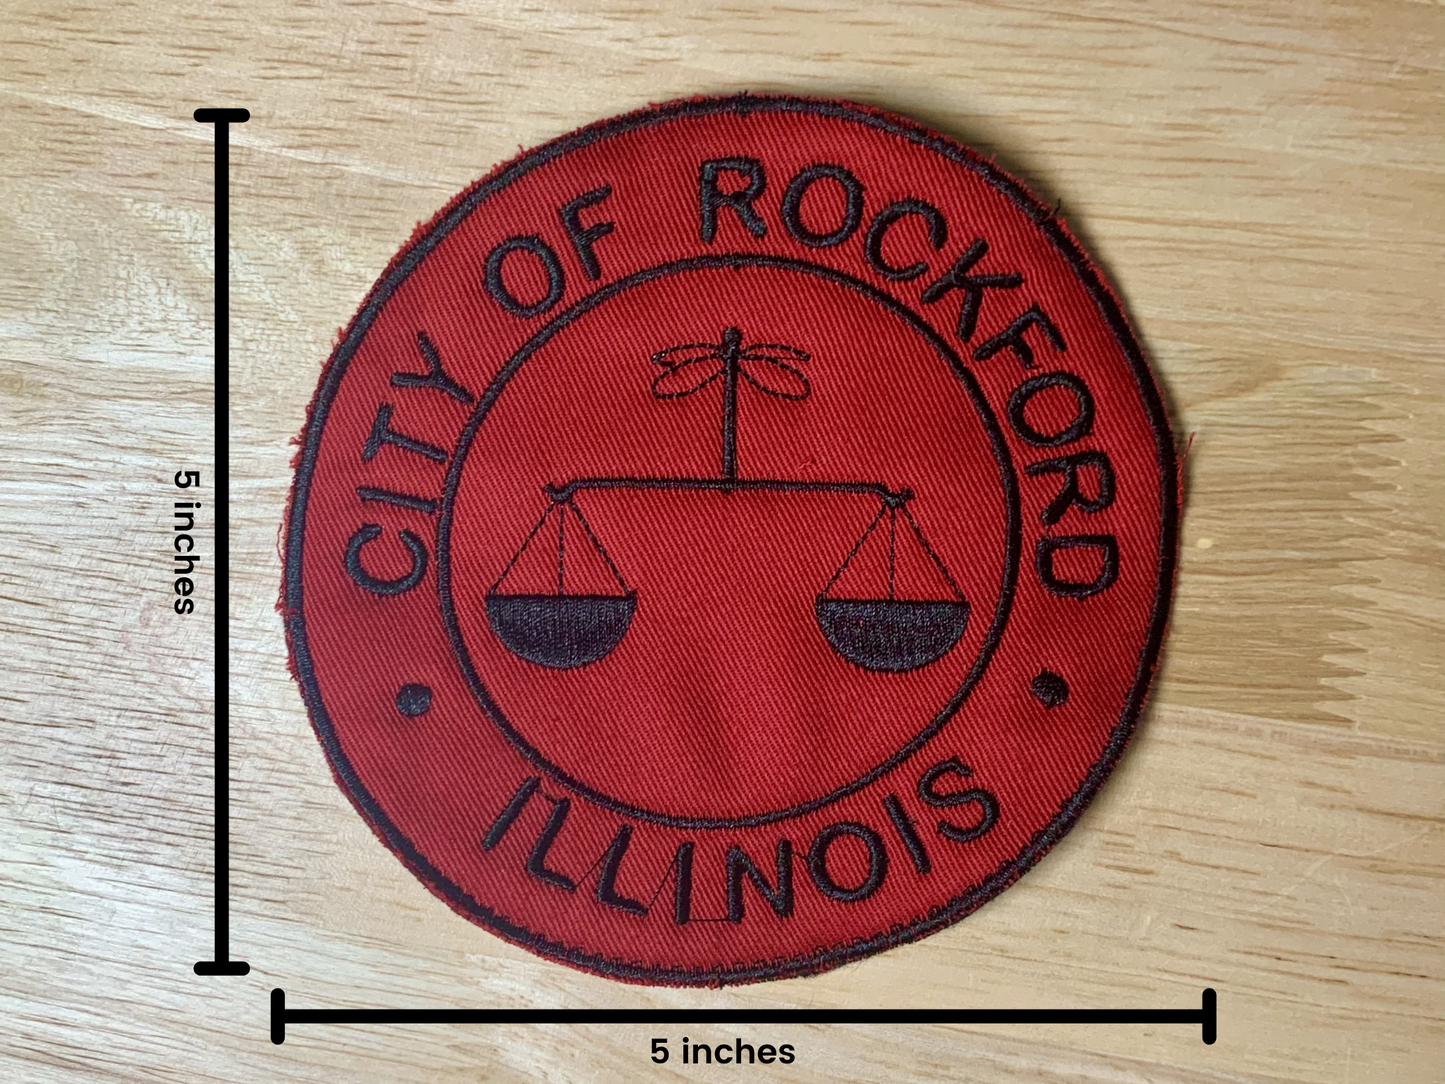 City of Rockford/Rockford Peaches Baseball Patch | Embroidered Iron on Applique